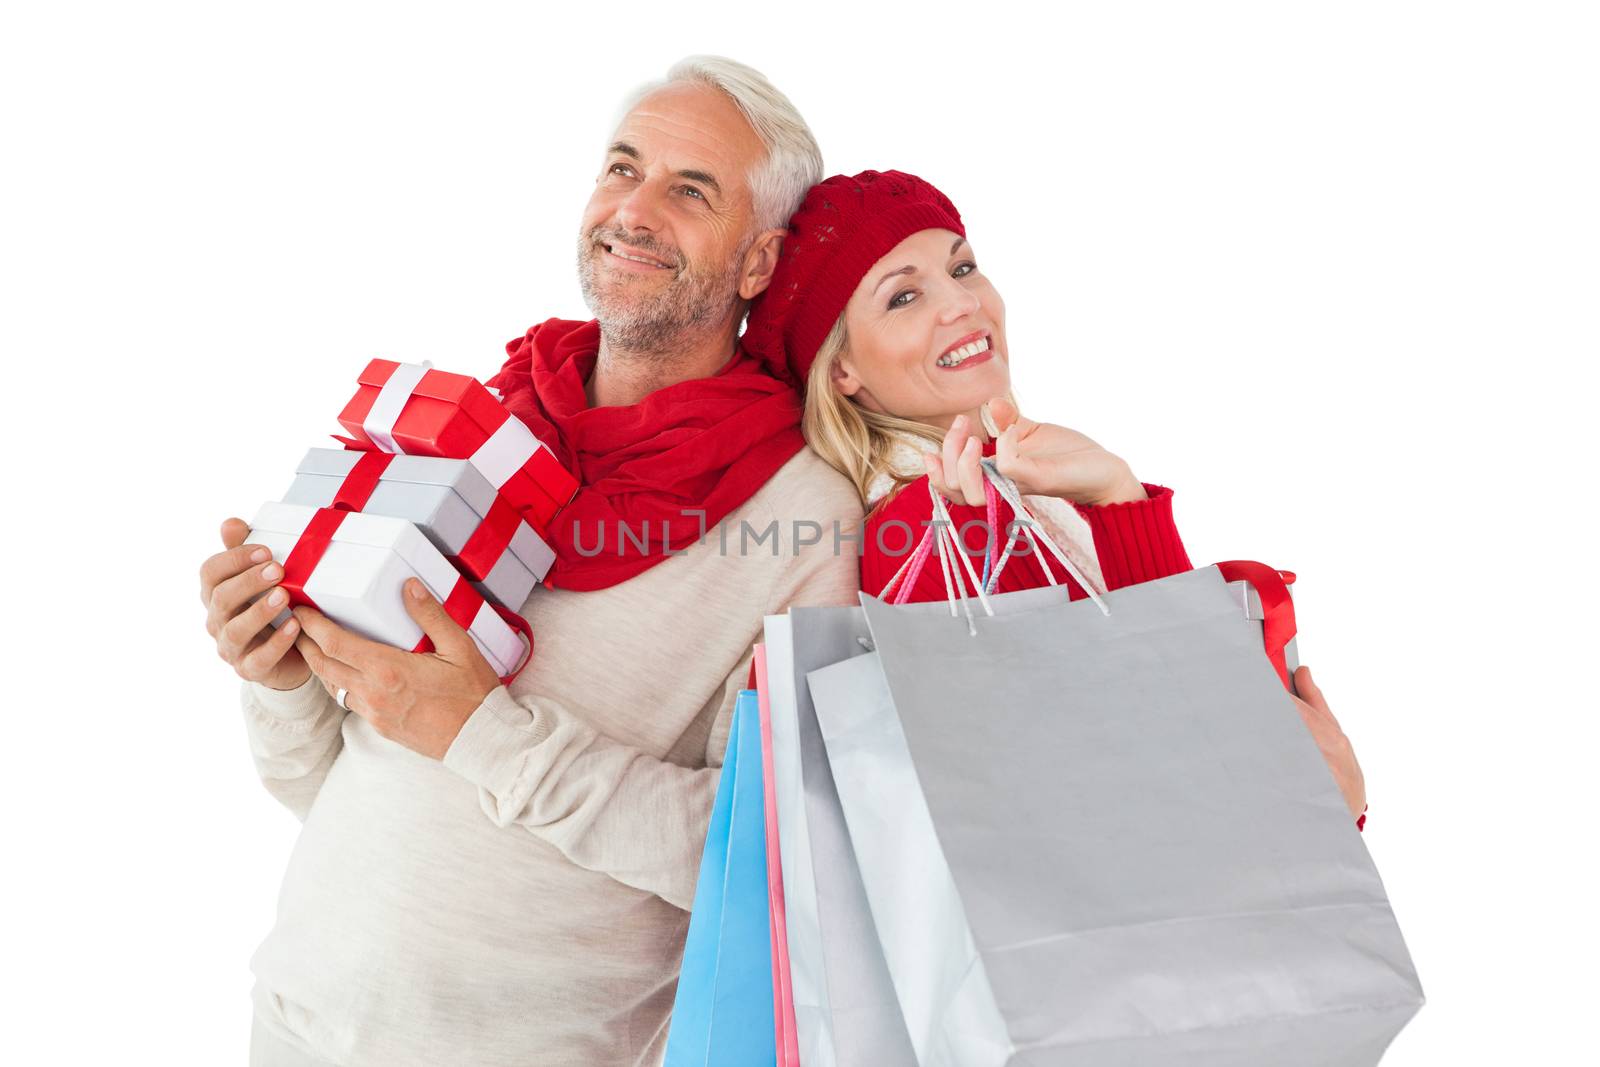 Smiling couple in winter fashion holding presents and shopping bags by Wavebreakmedia